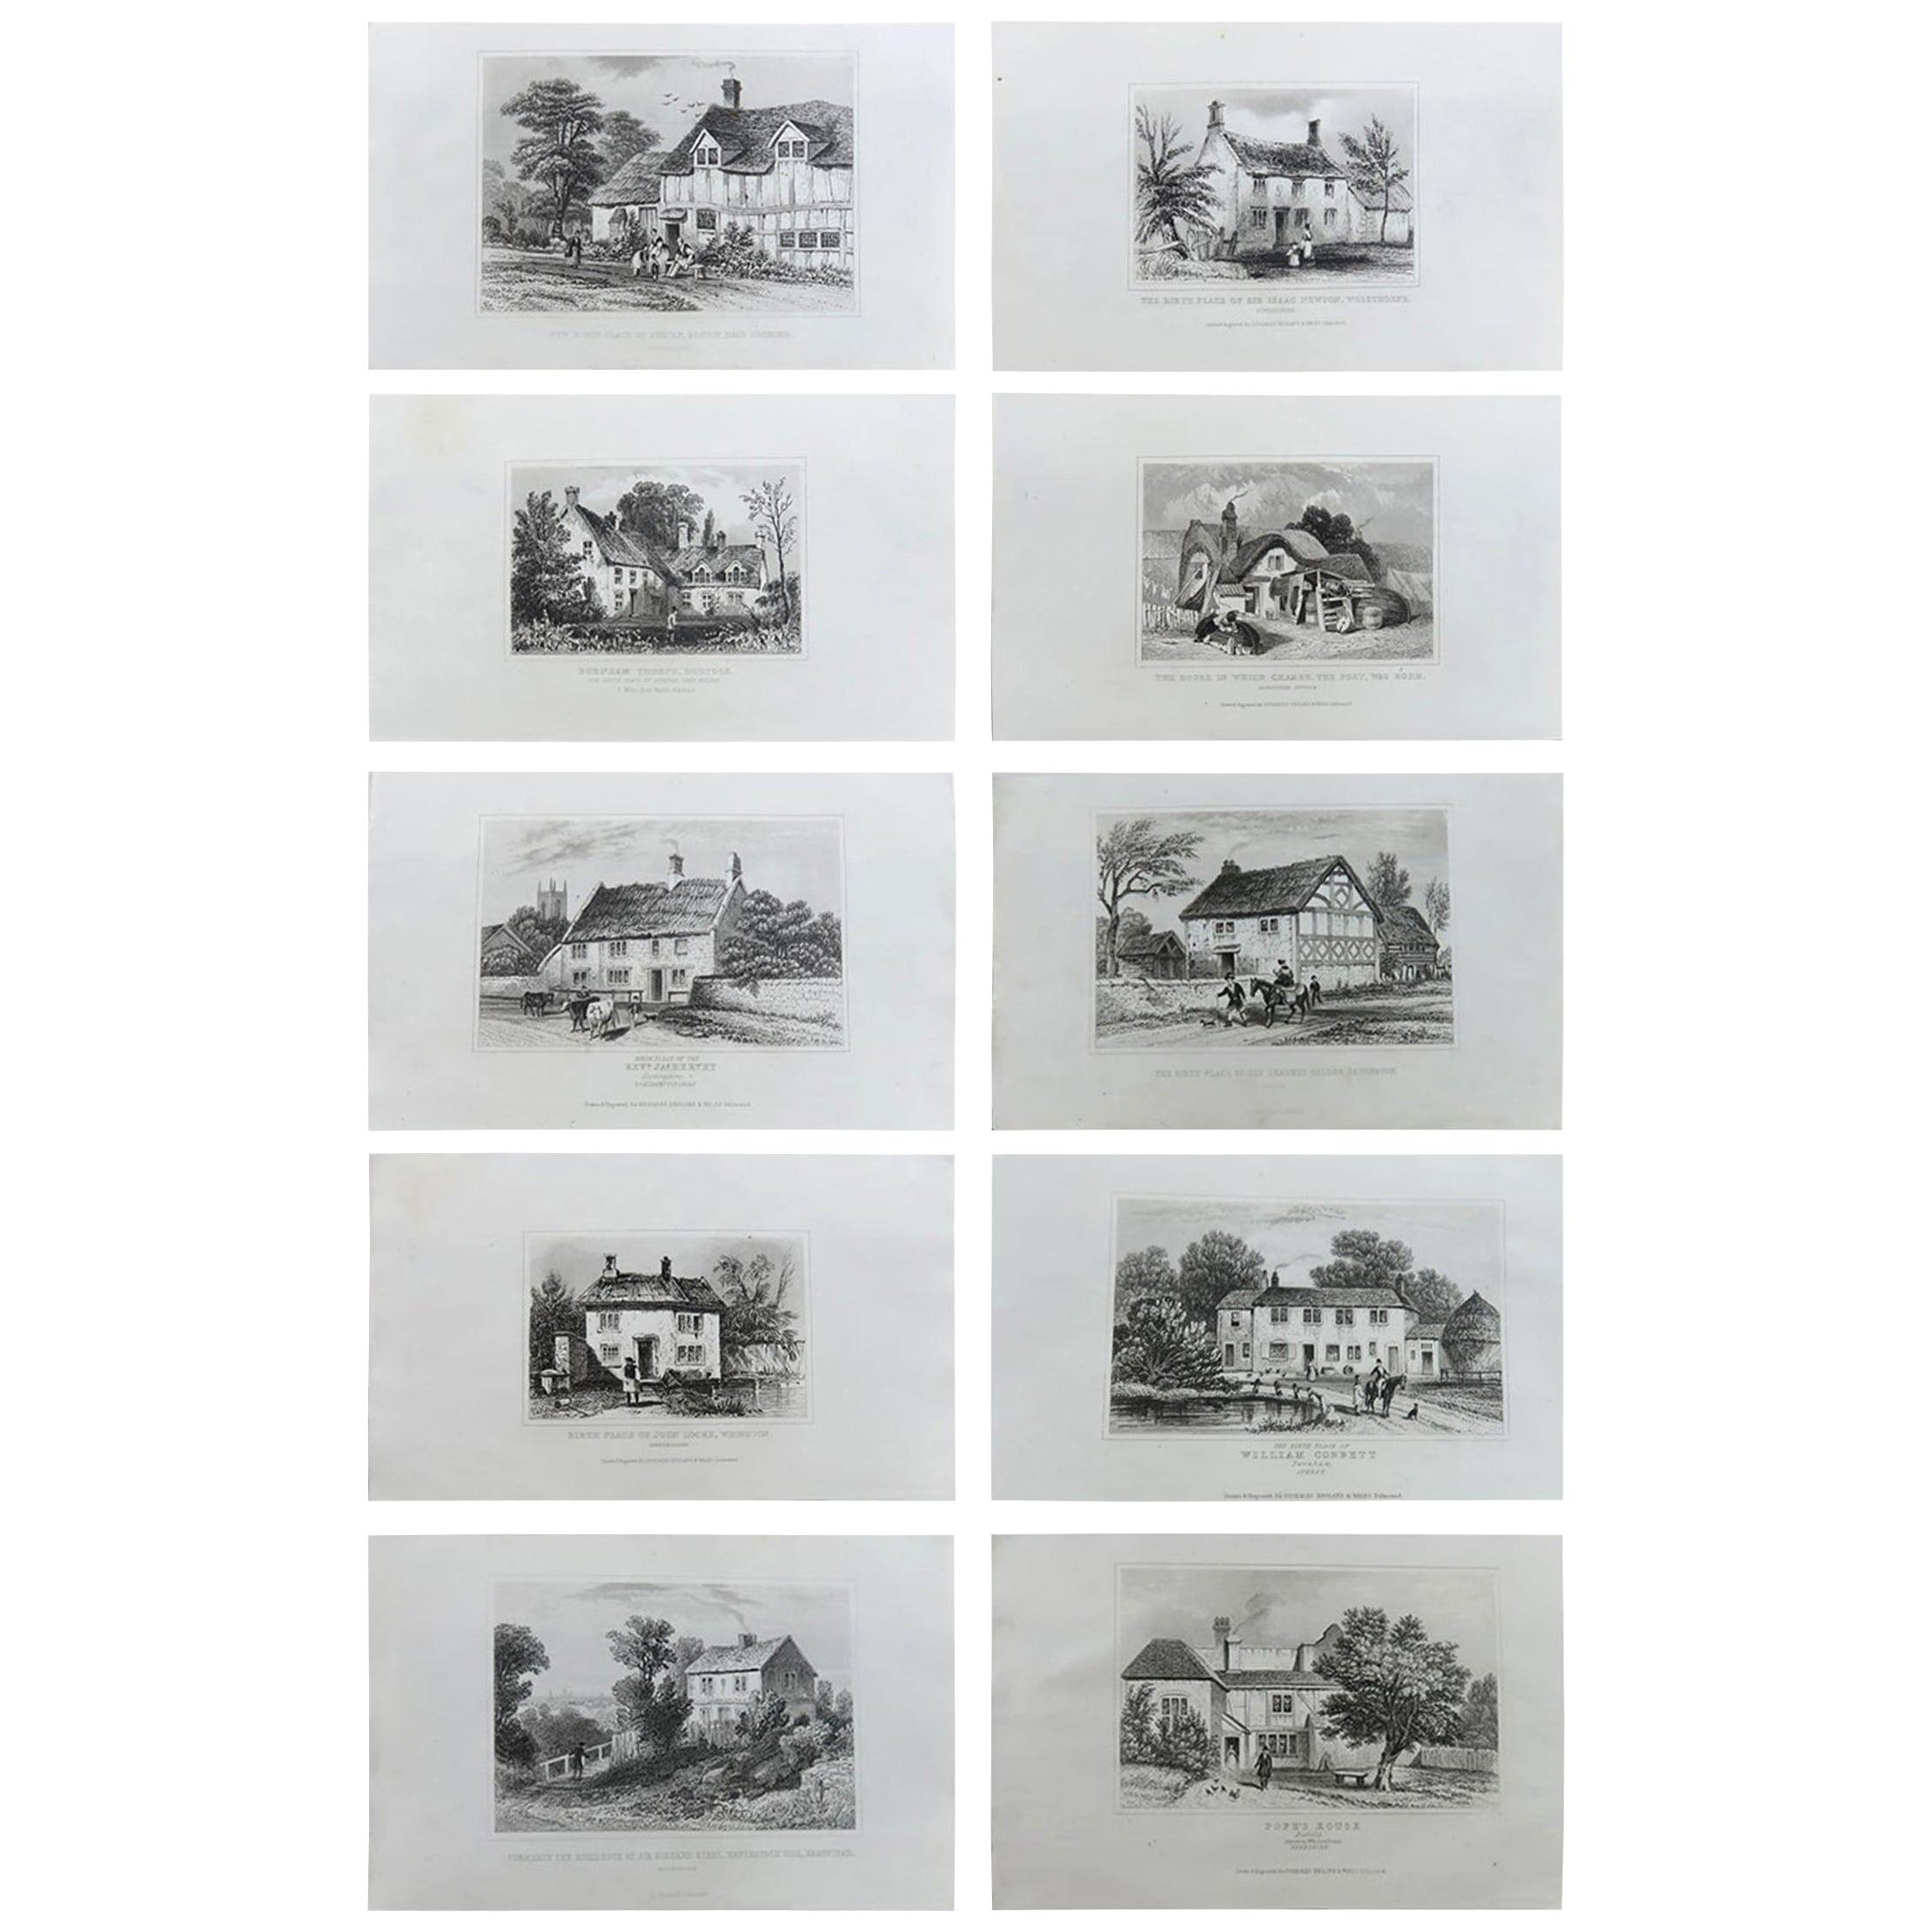 Set of 10 Antique Prints of English Country Cottages, circa 1840